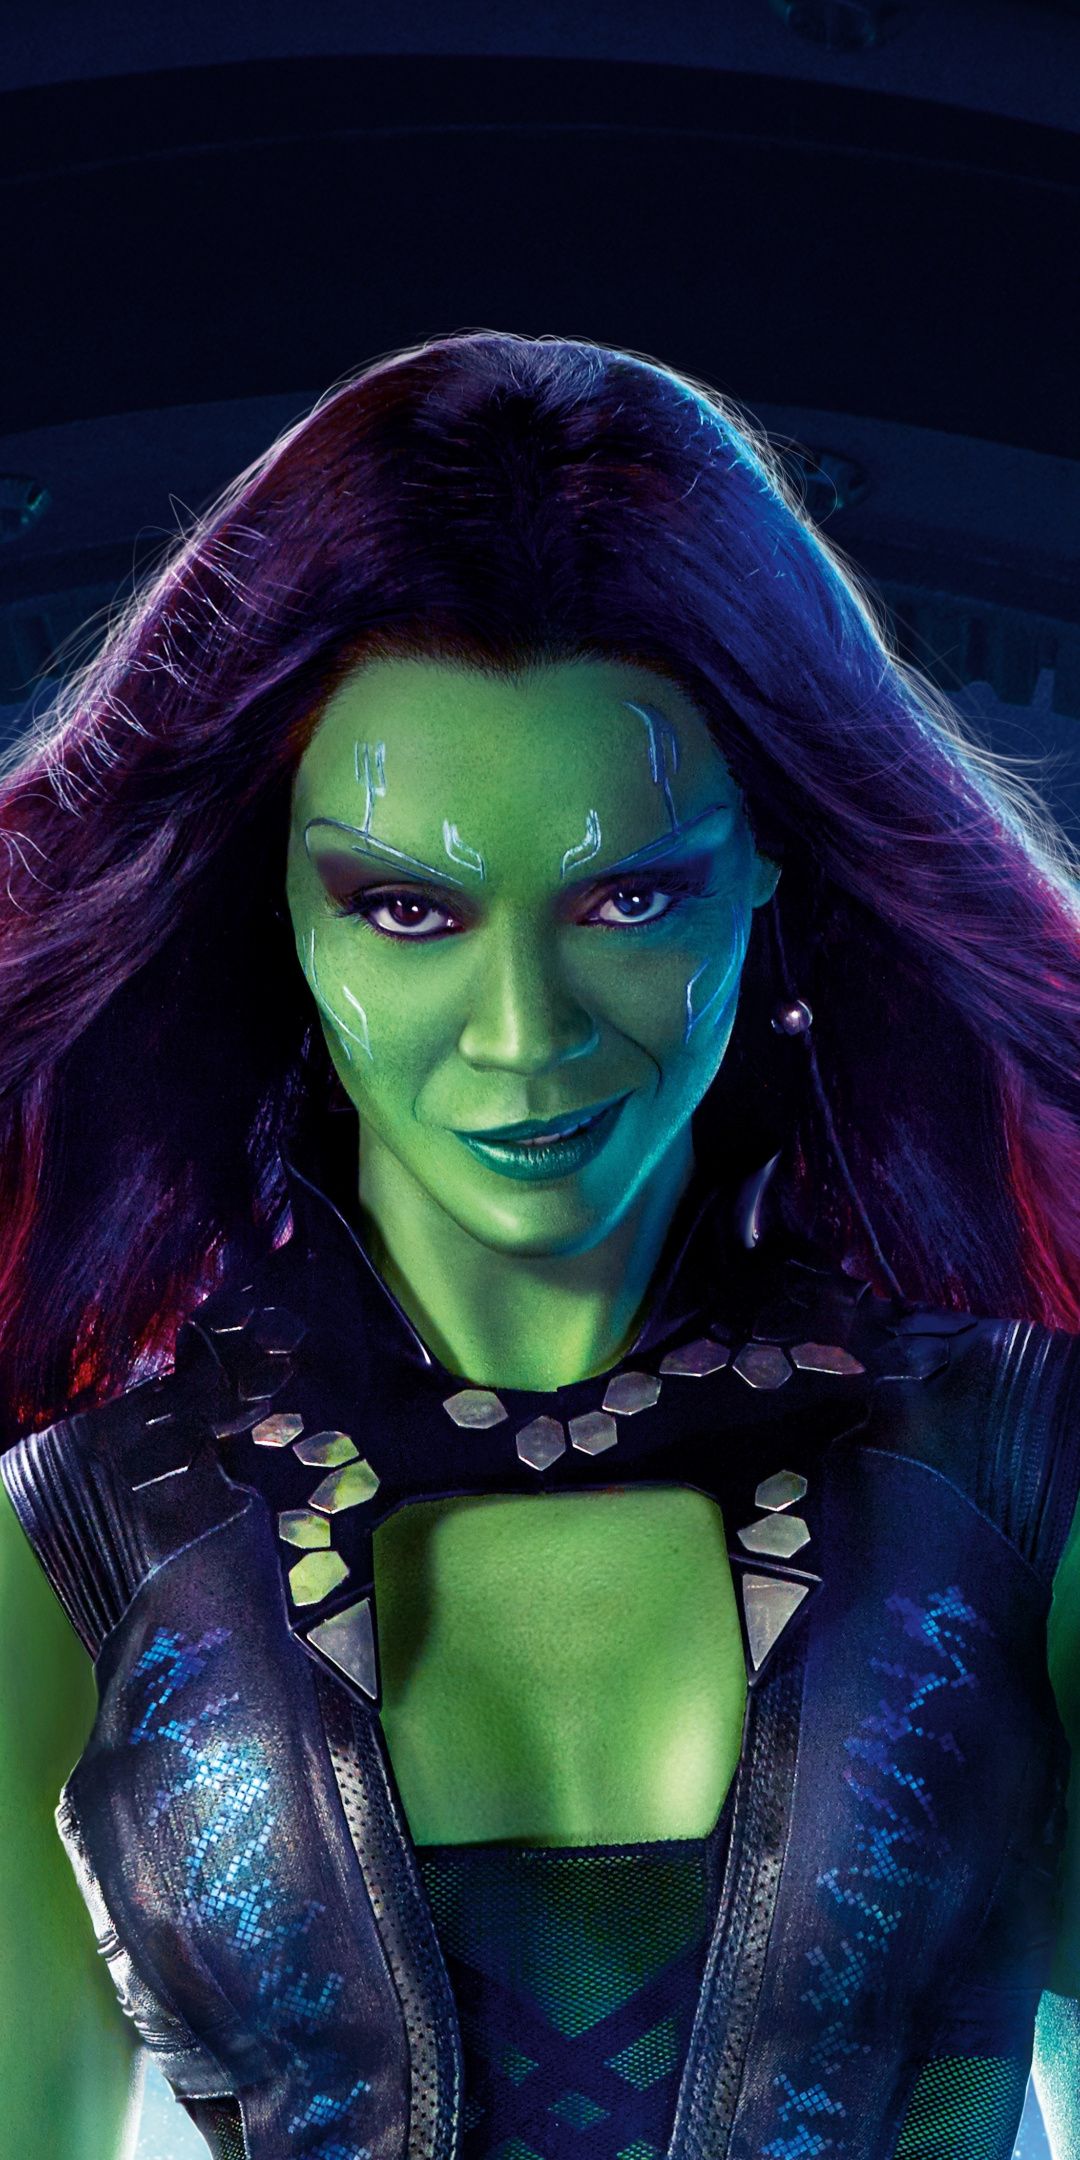 Gamora Marvel's Guardians Of The Galaxy Wallpapers